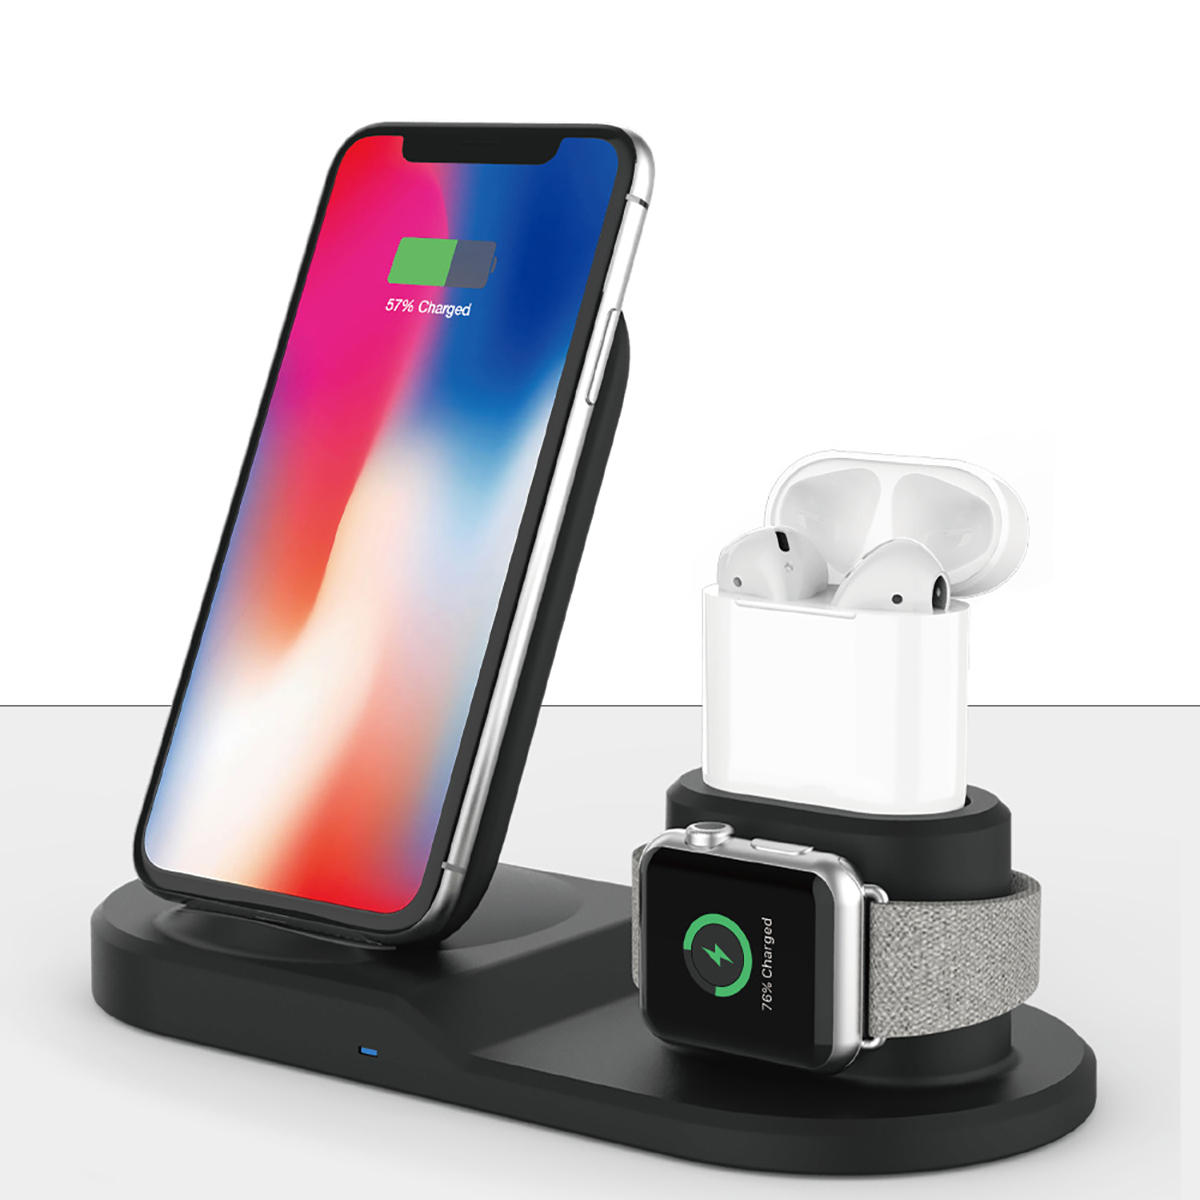 3 In 1 Qi Wireless Charger Watch Charger Earbuds Charger Phone Holder for Qi-enabled Smart Phone for iPhone Apple Watch